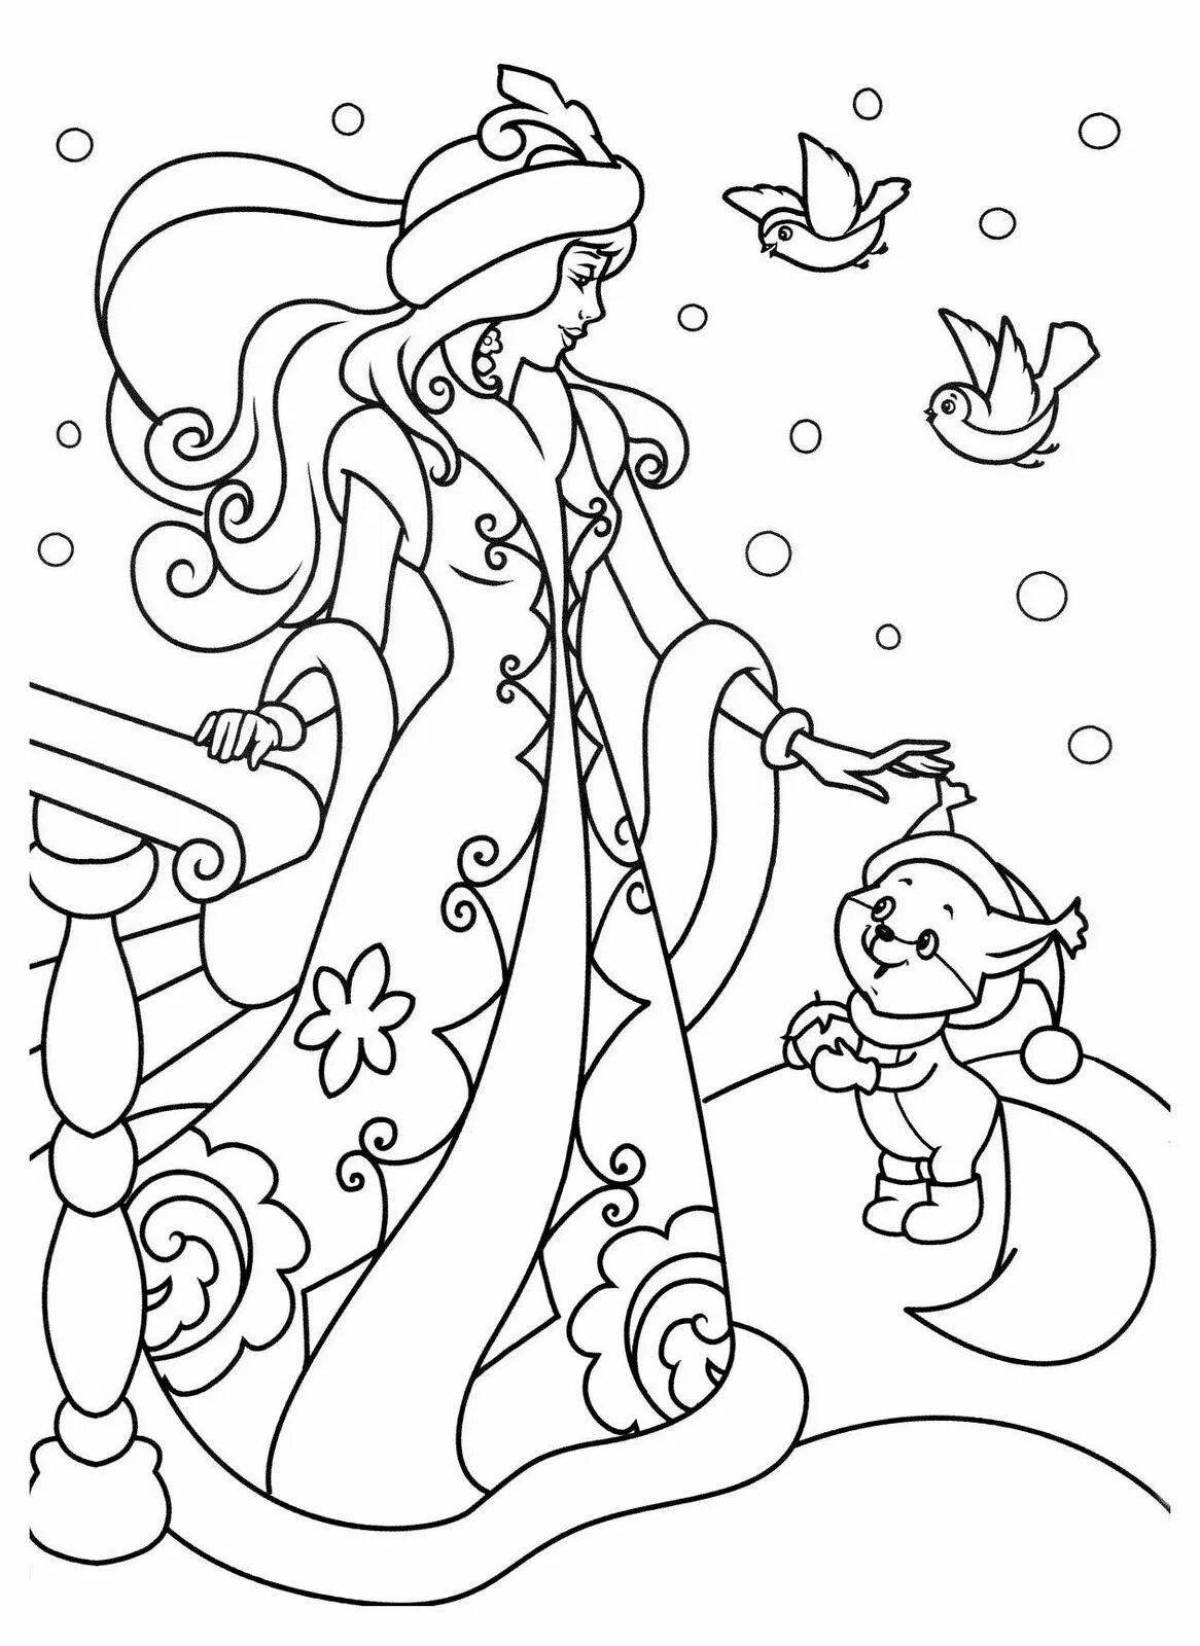 A fascinating Christmas coloring book for girls 8 years old